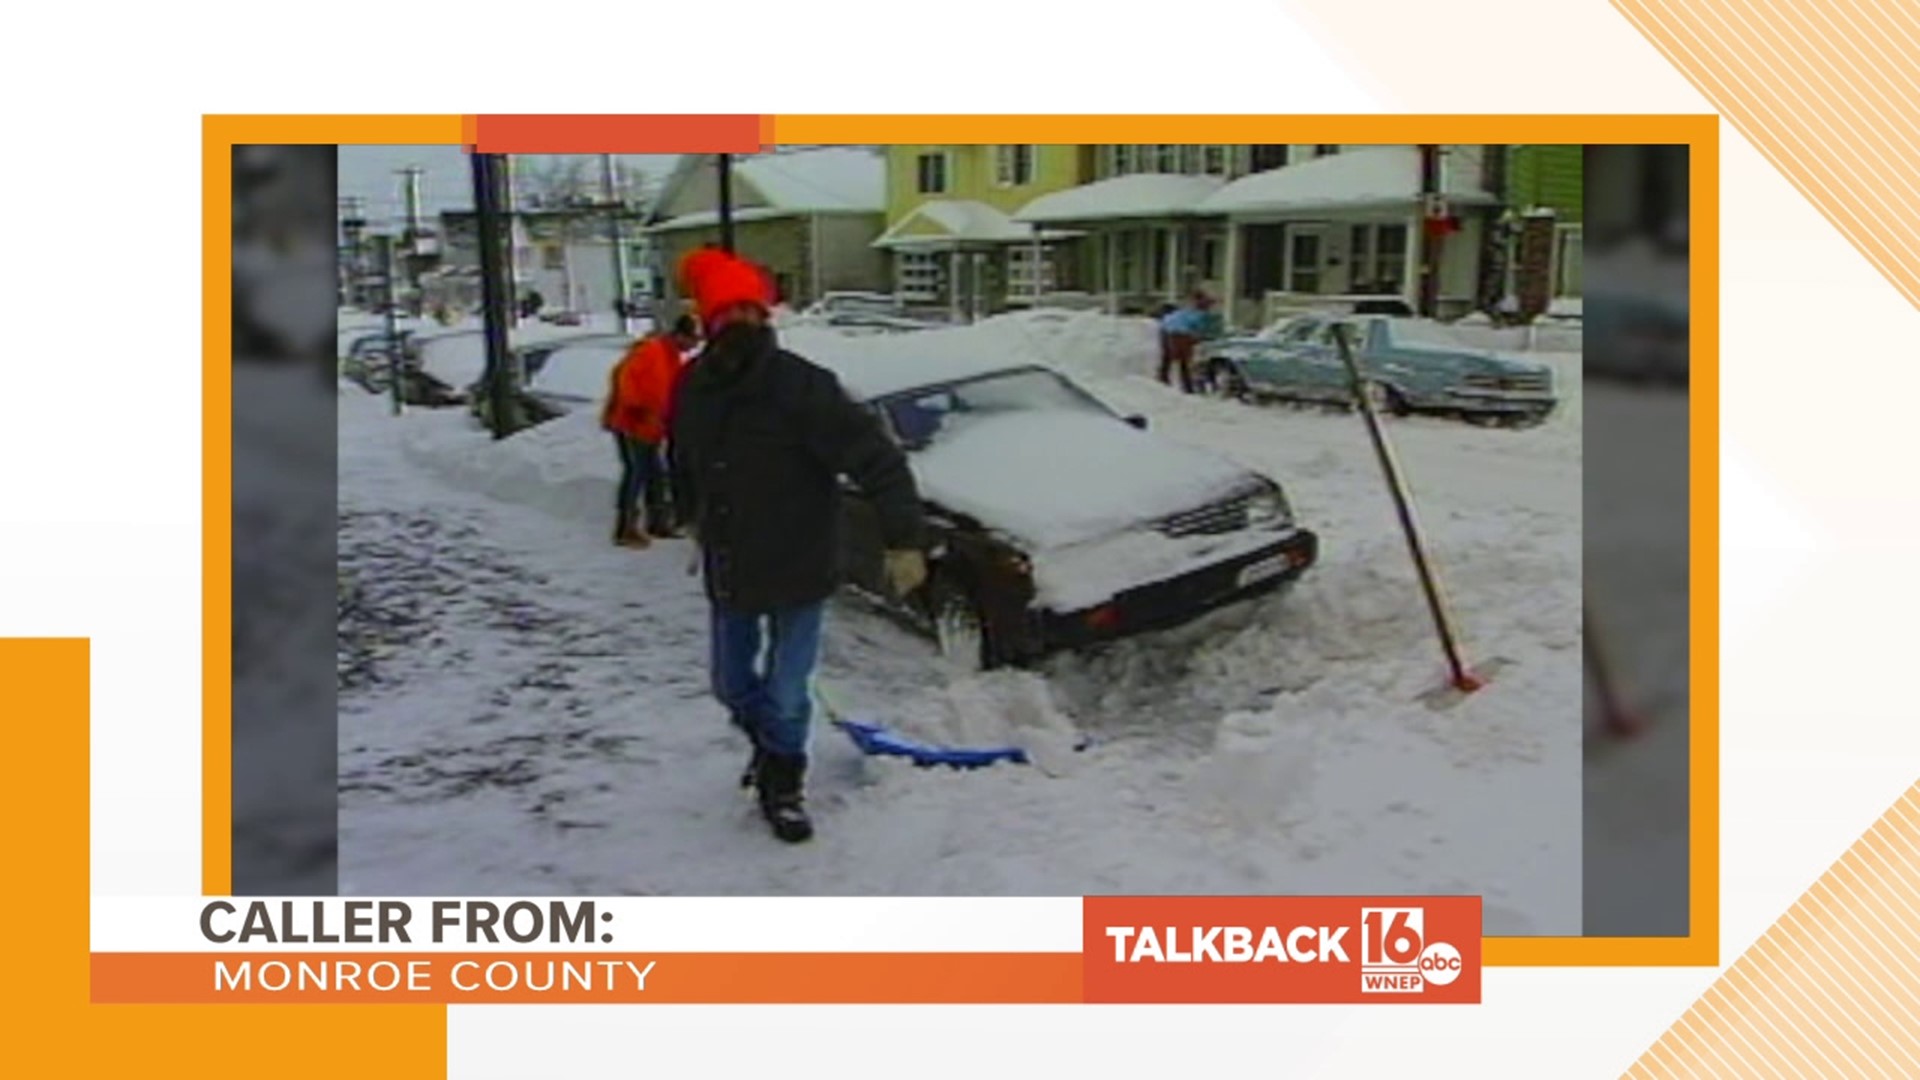 Callers are commenting on all aspects of the winter weather in this Talkback 16.